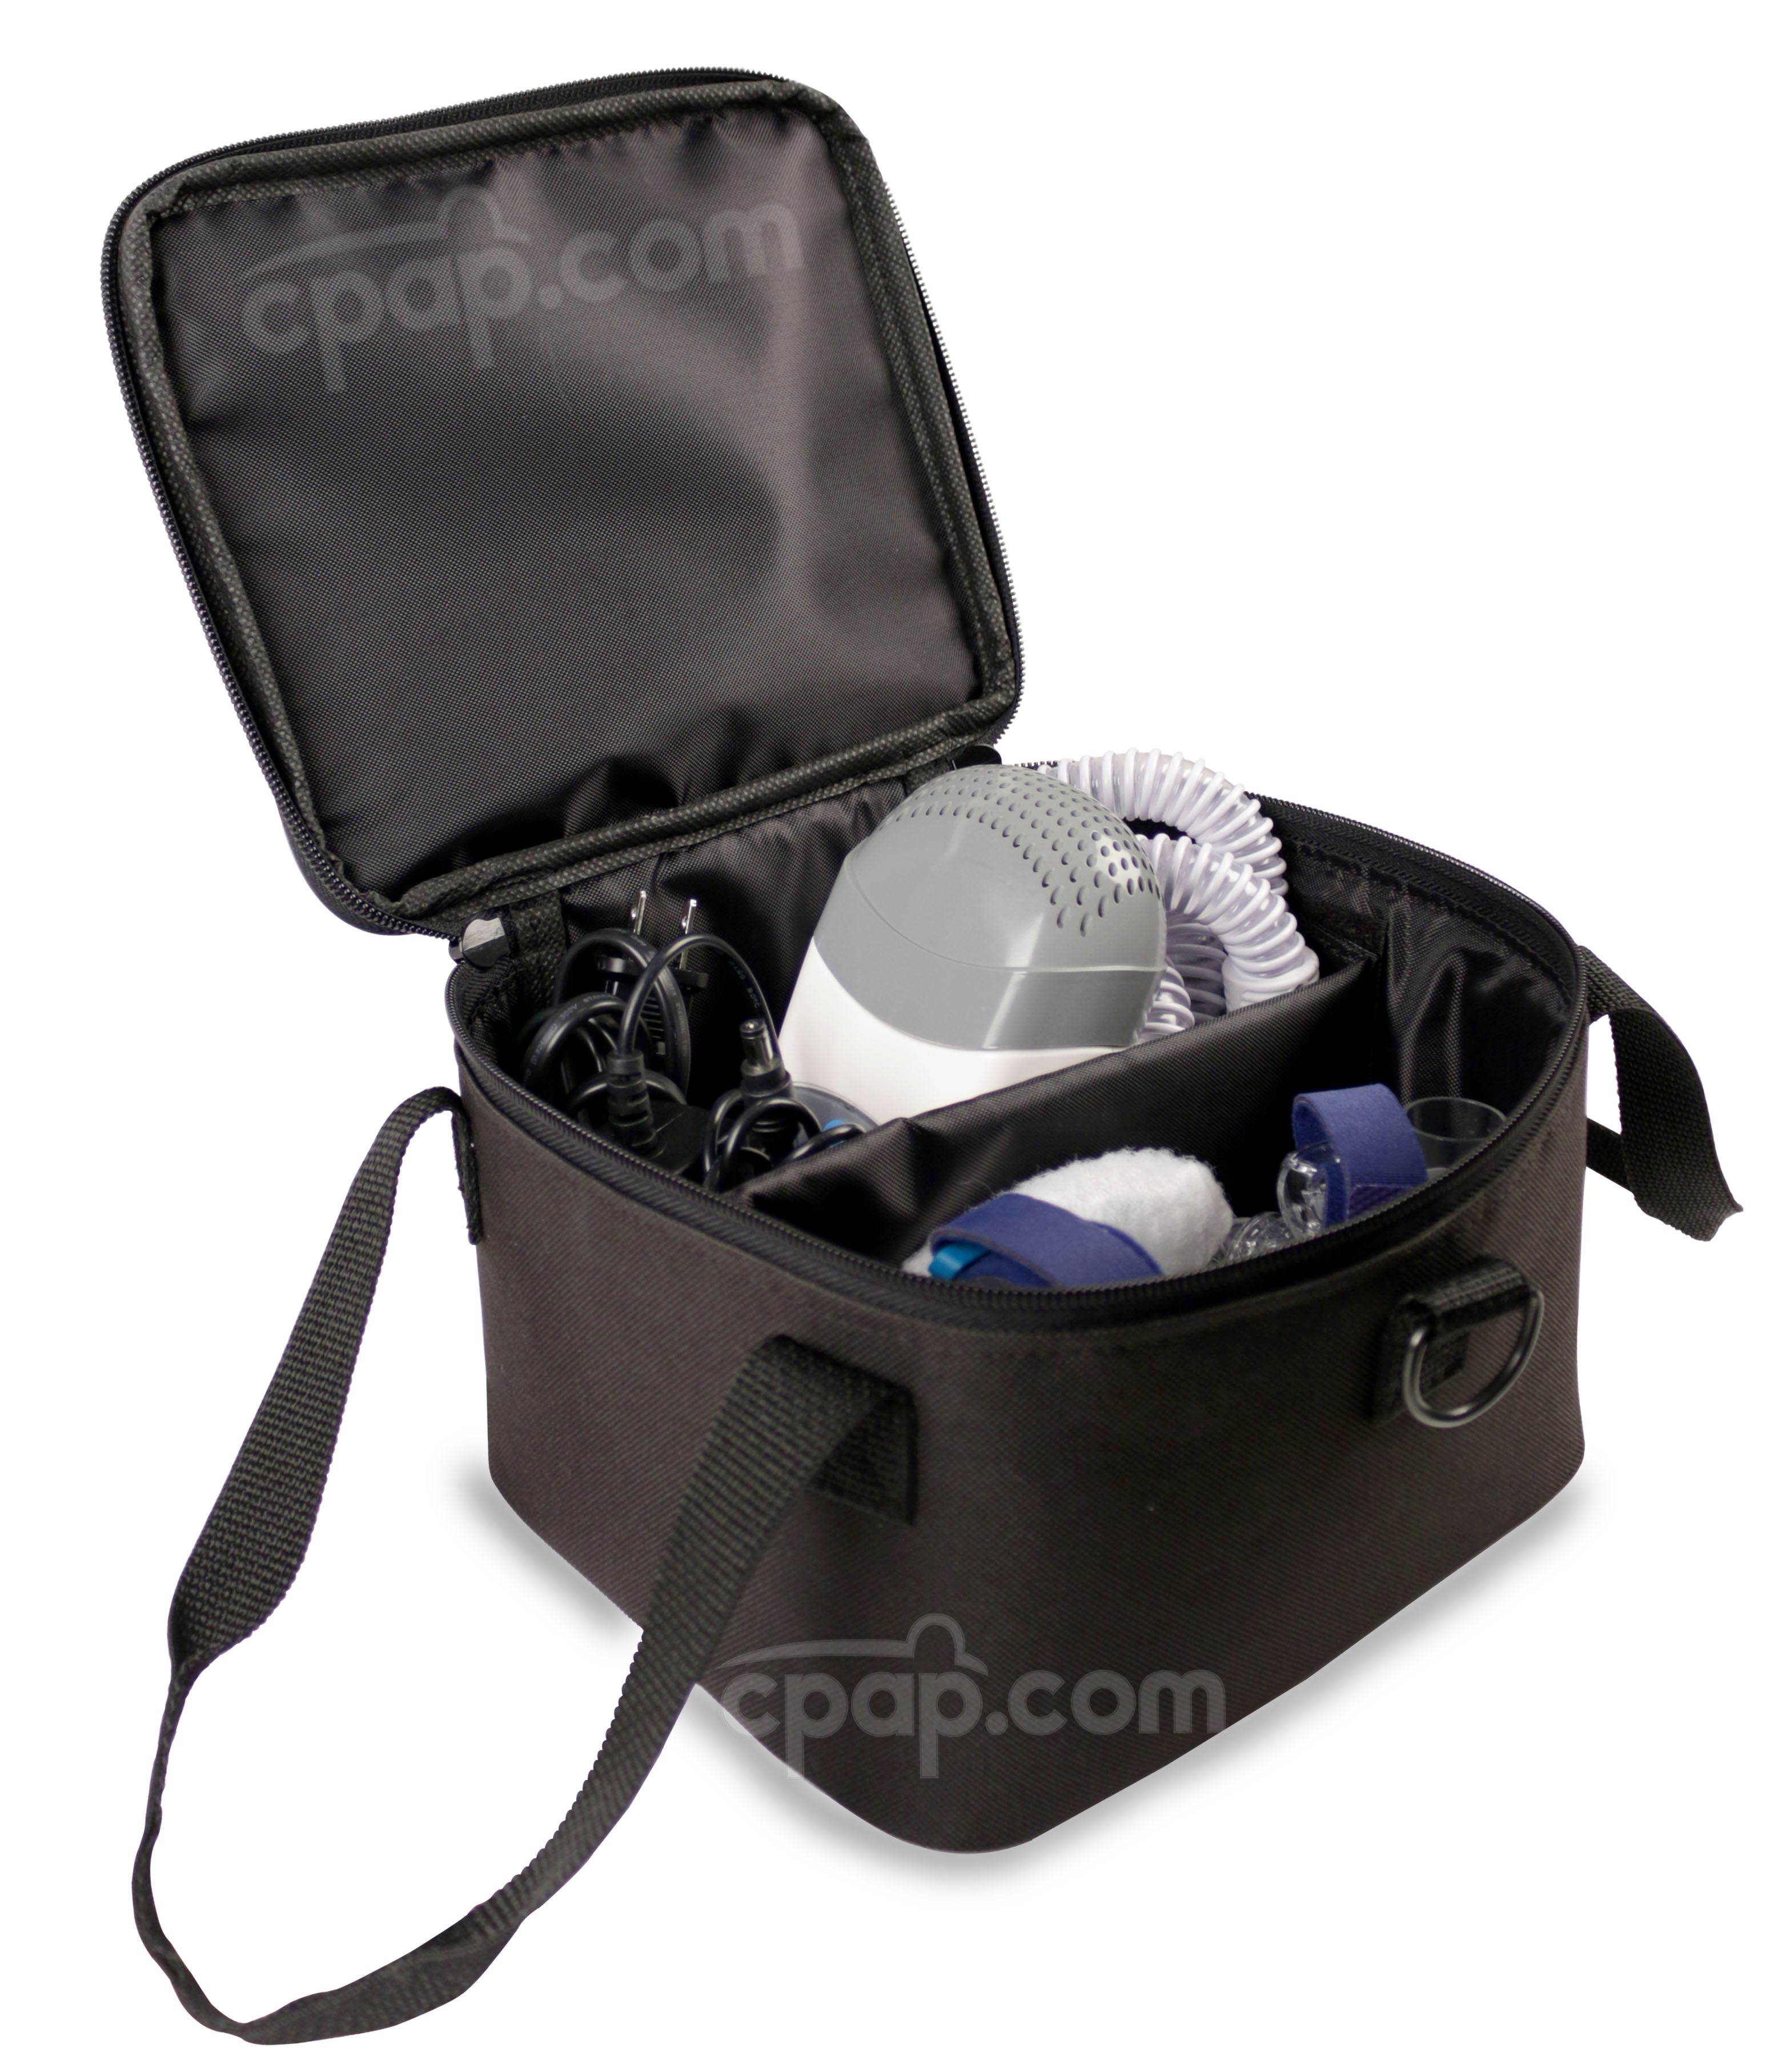 https://images.cpap.com/products/royal-case/32193/small-travel-bag-open-with-accessories-cpapdotcom-2.jpg